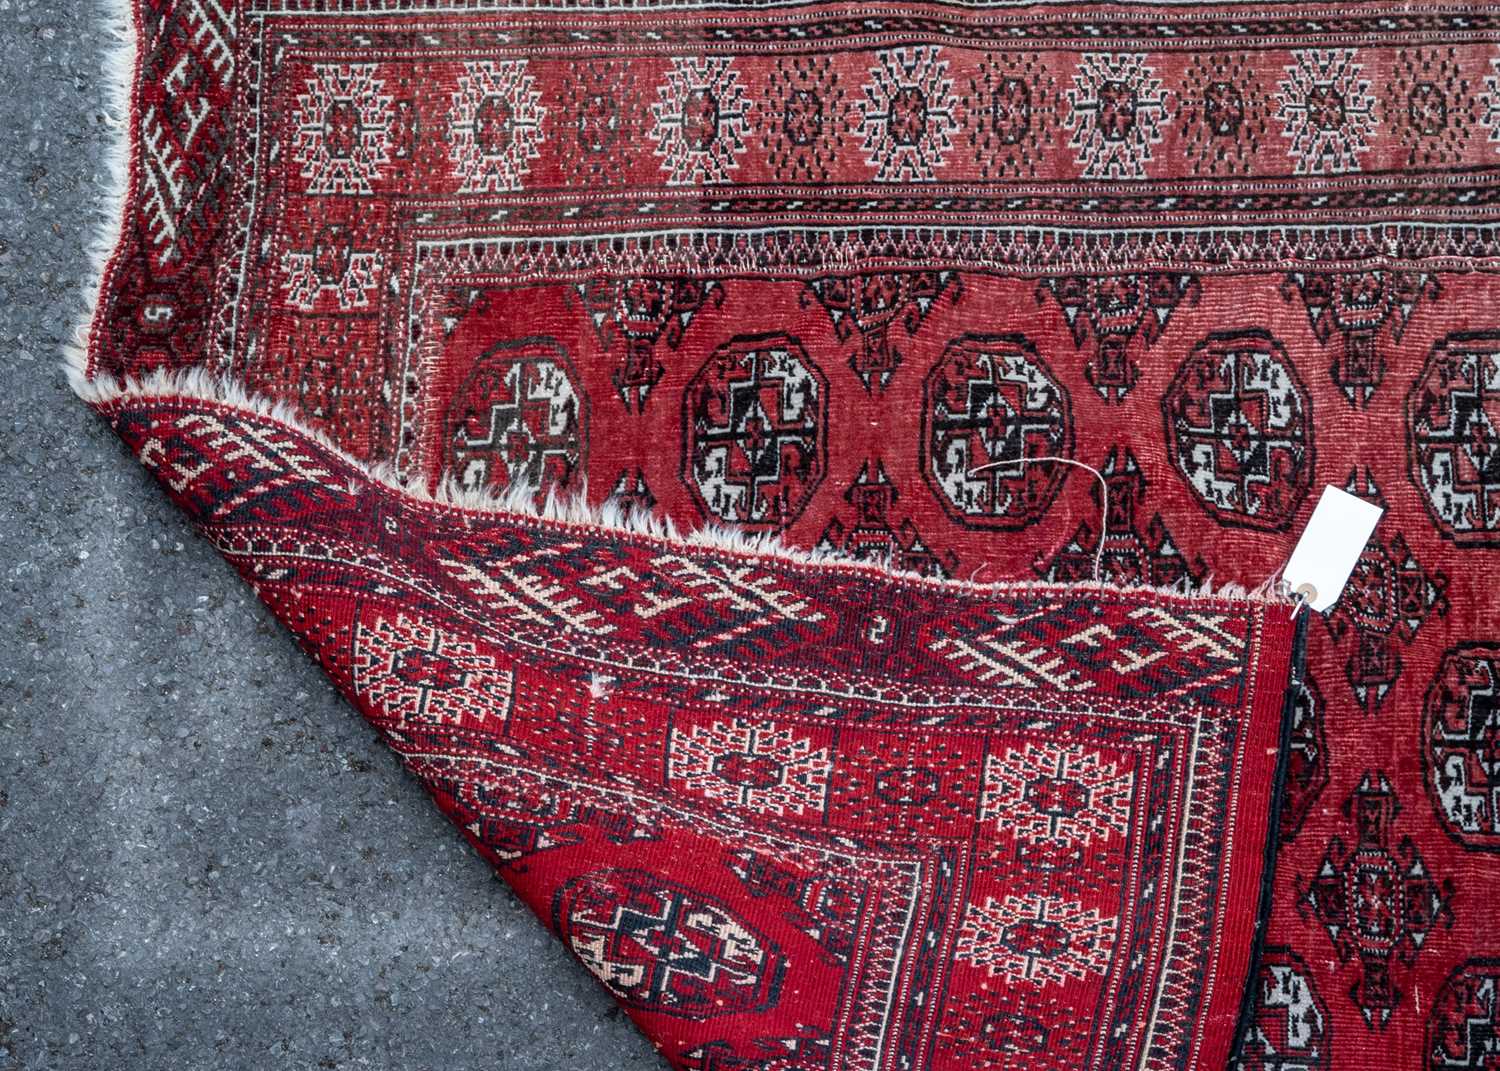 A red ground rug with all over geometric shapes within a brown and black banded border, 130cm x - Image 2 of 2